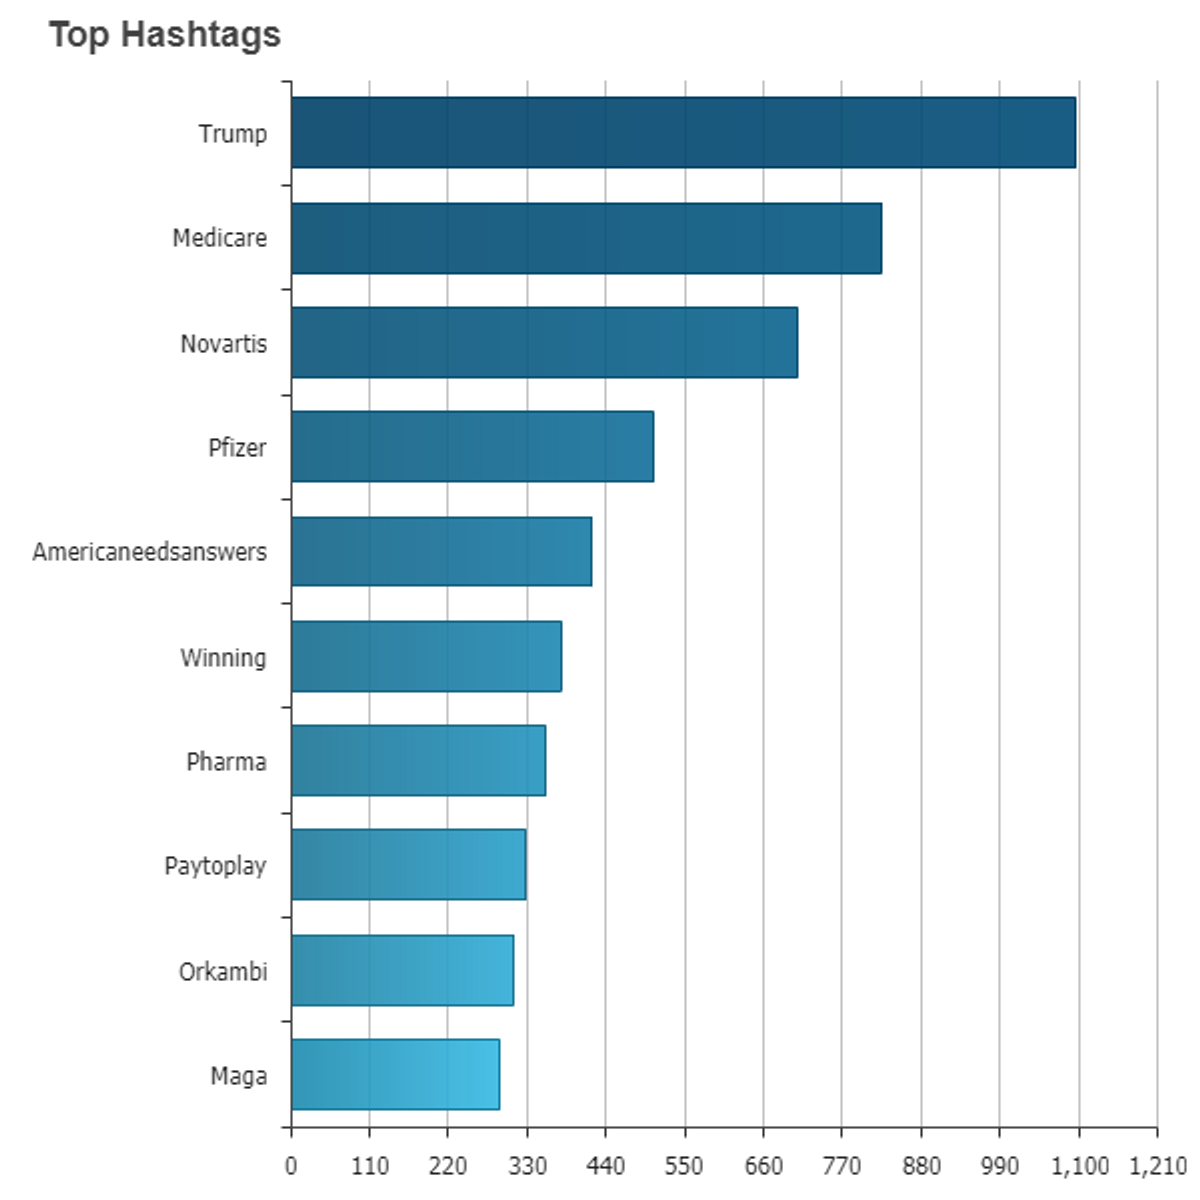 A chart showing the impact of top hashtags